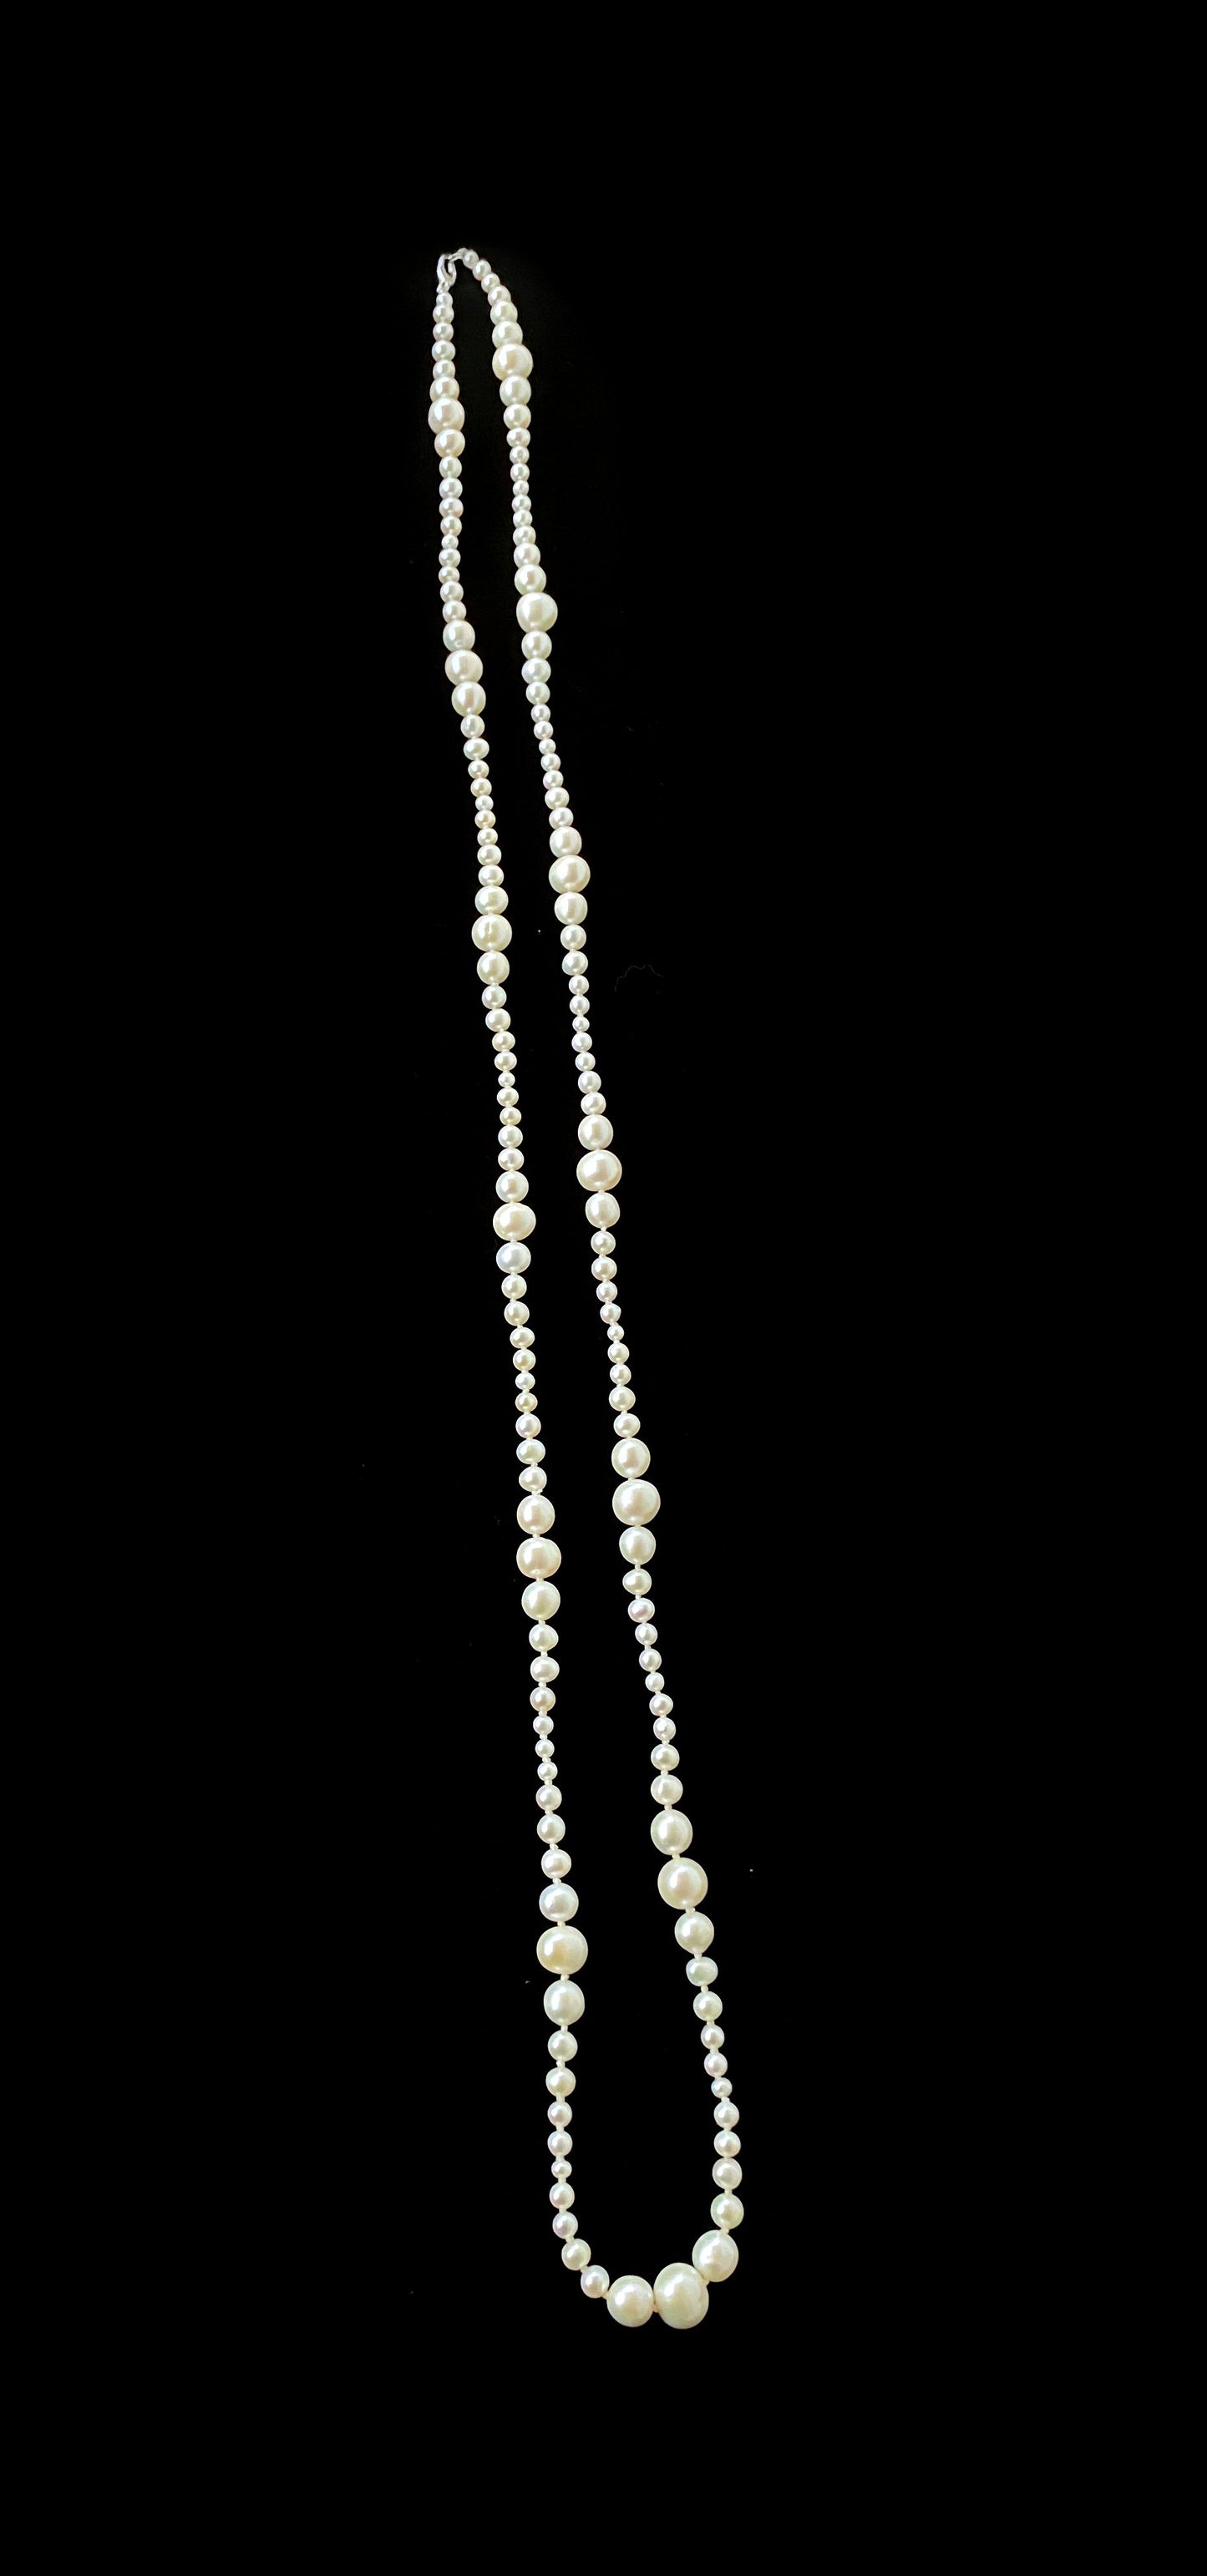 Graduated Pearl Necklace with 14k White Gold Clasp